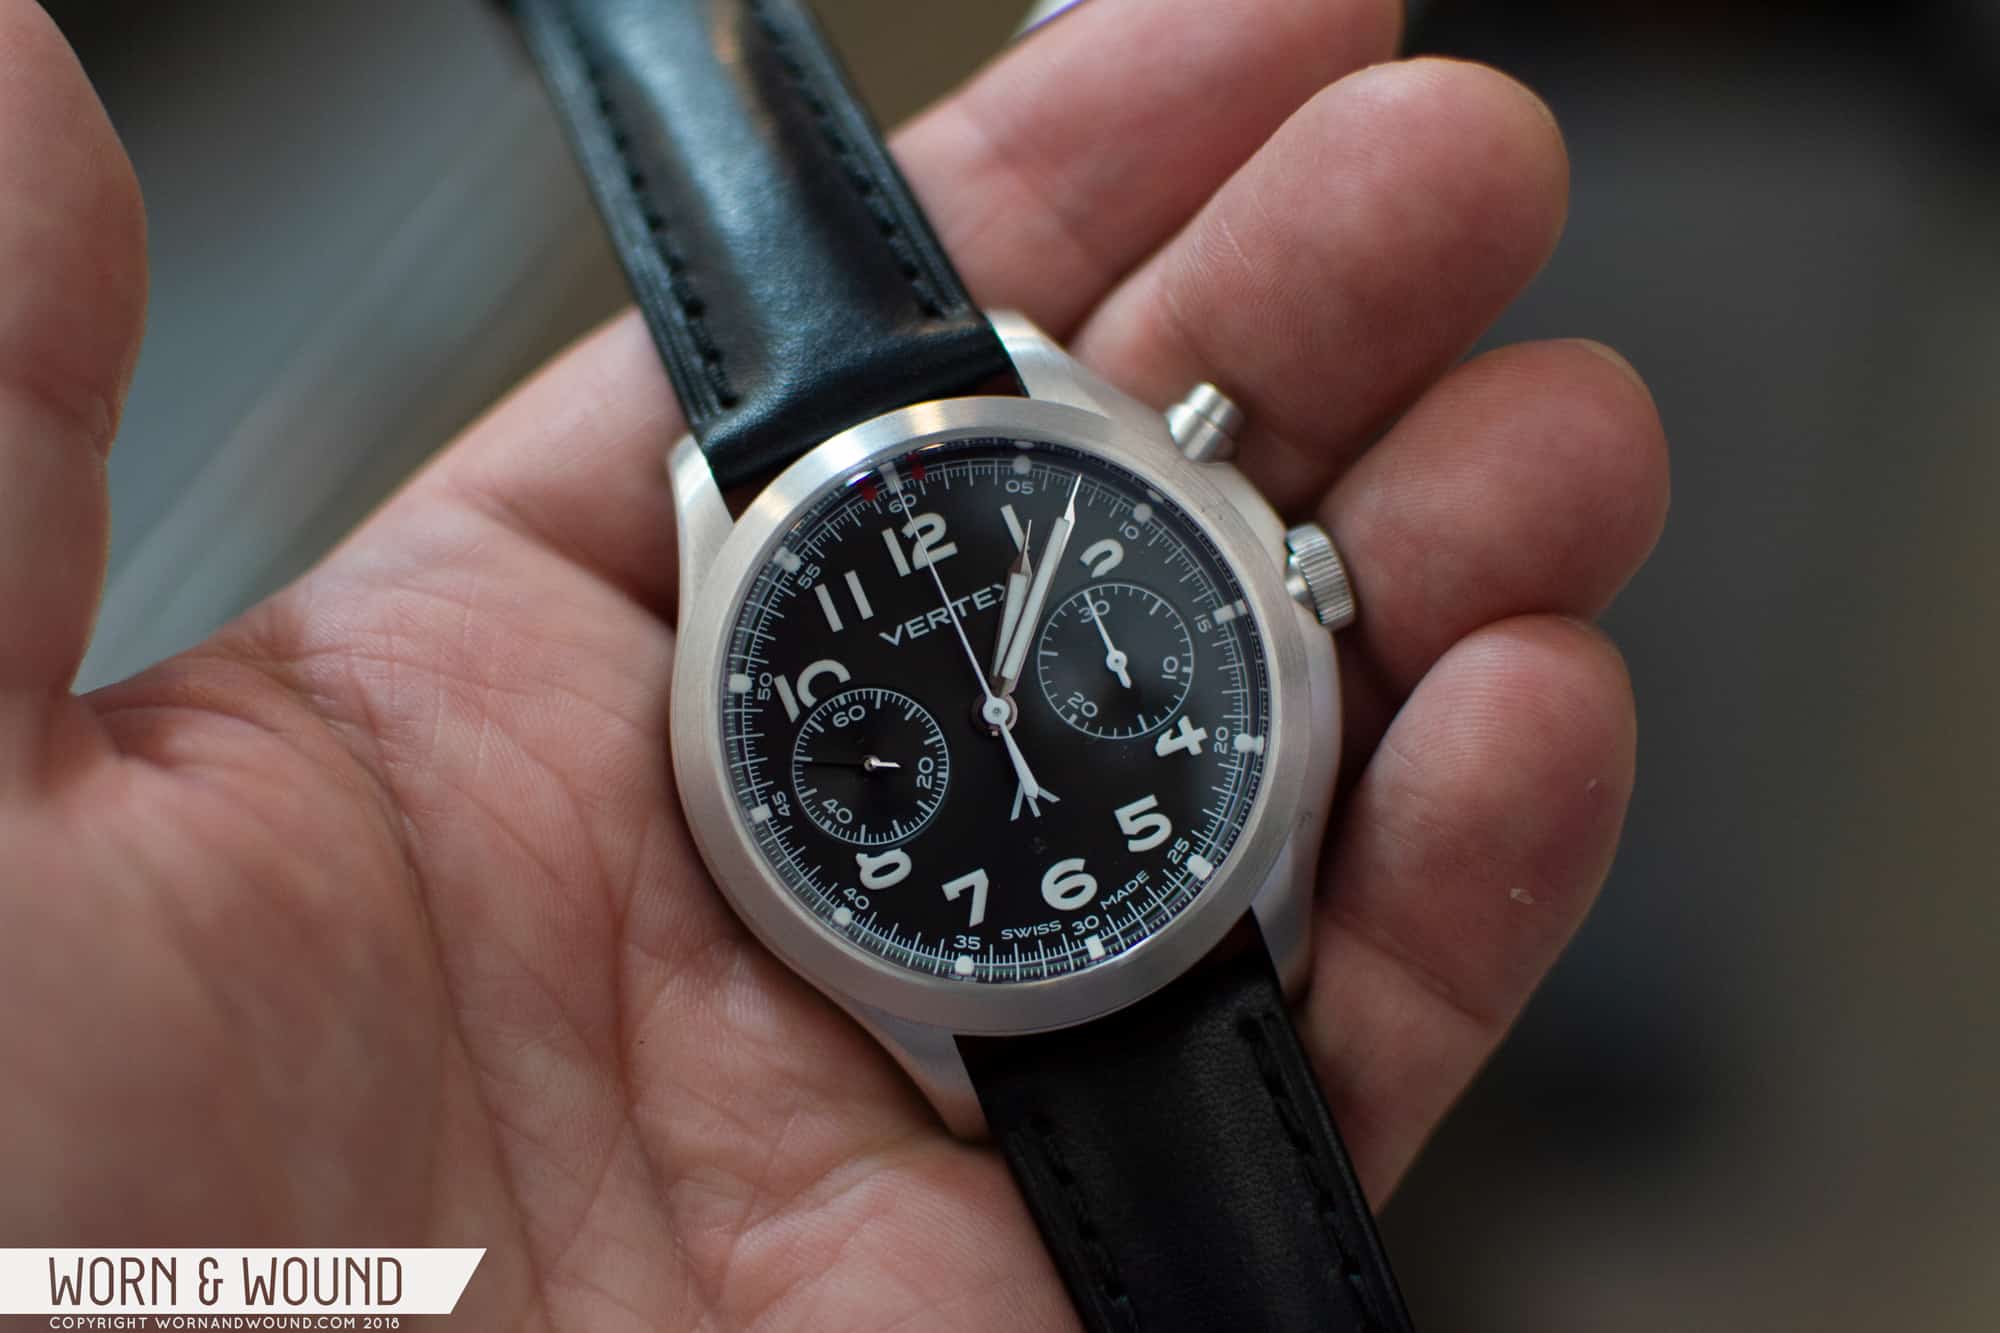 Worn & Wound’s Highlights From This Year’s SalonQP